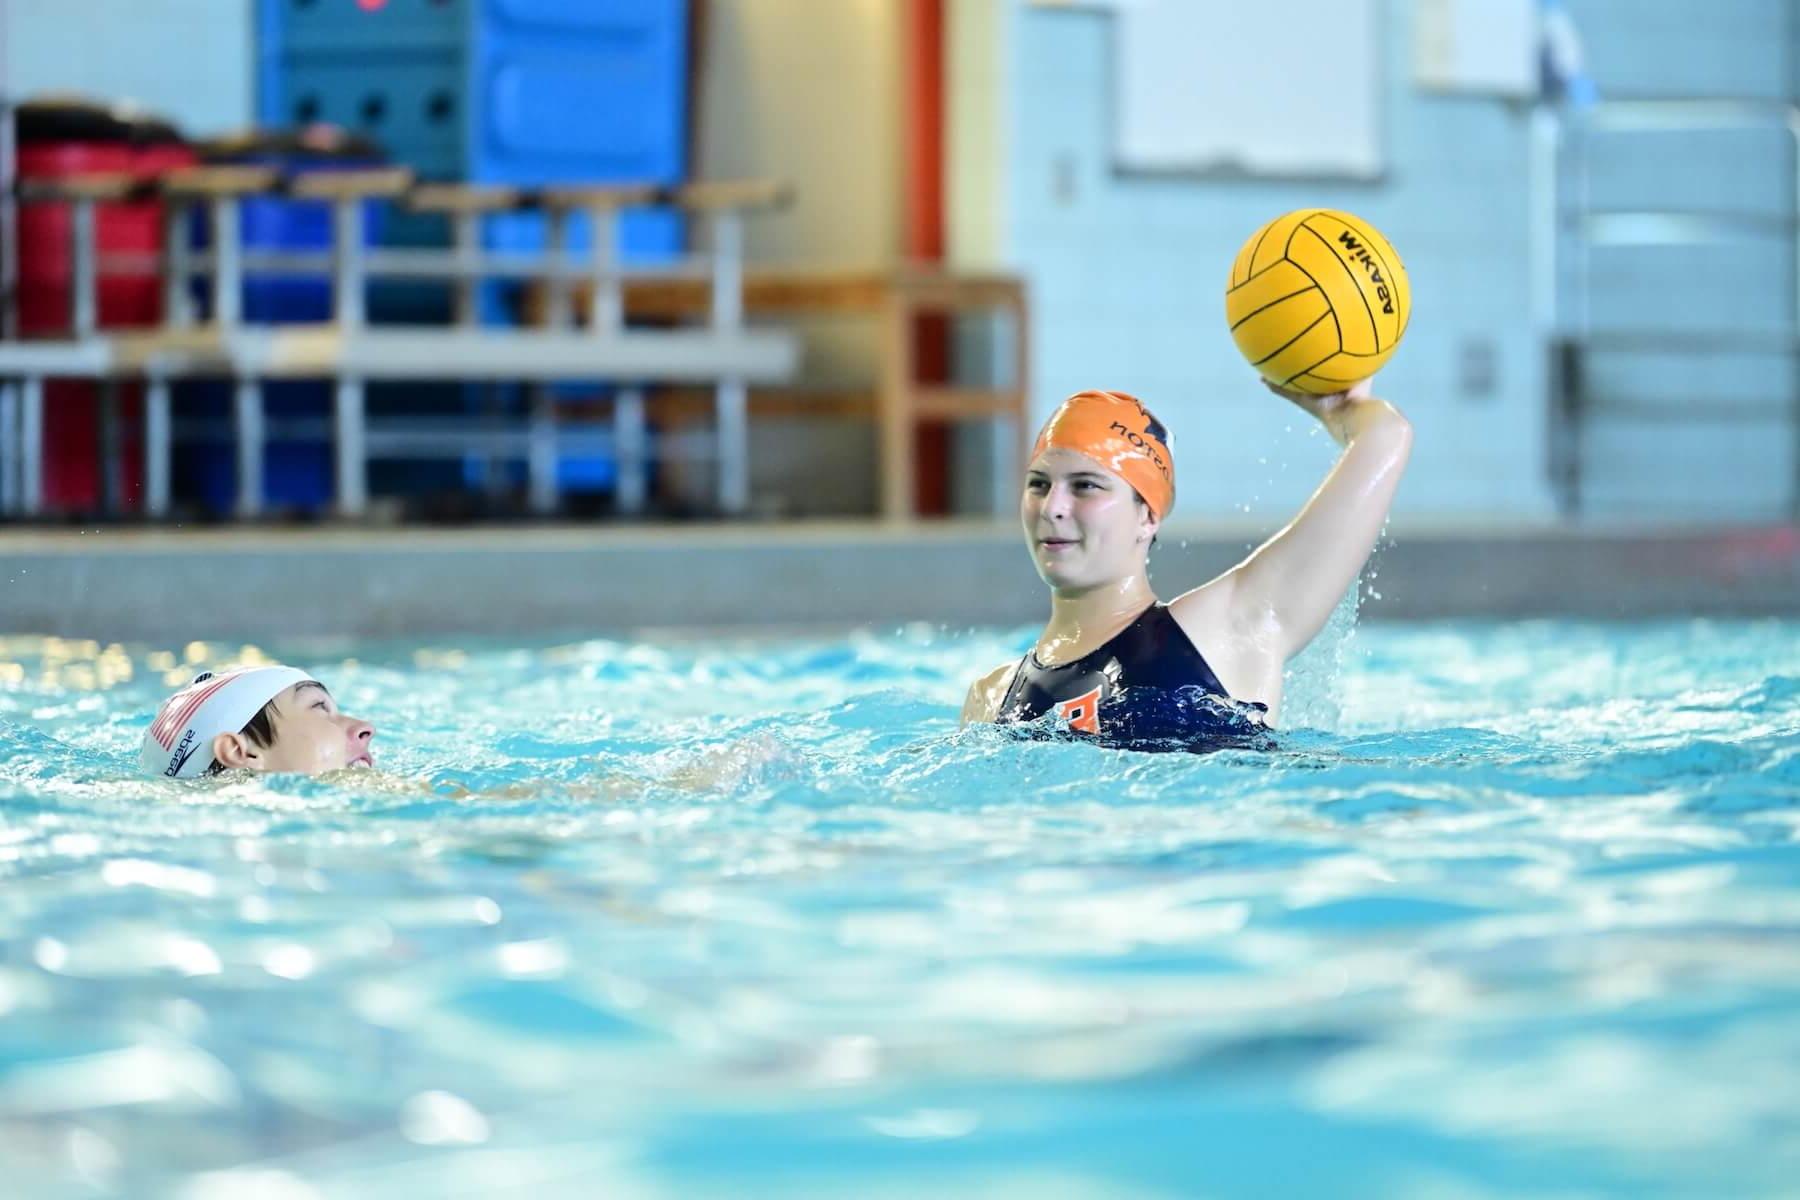 Ethical Culture Fieldston School Fieldston Upper water polo player in pool throws the ball